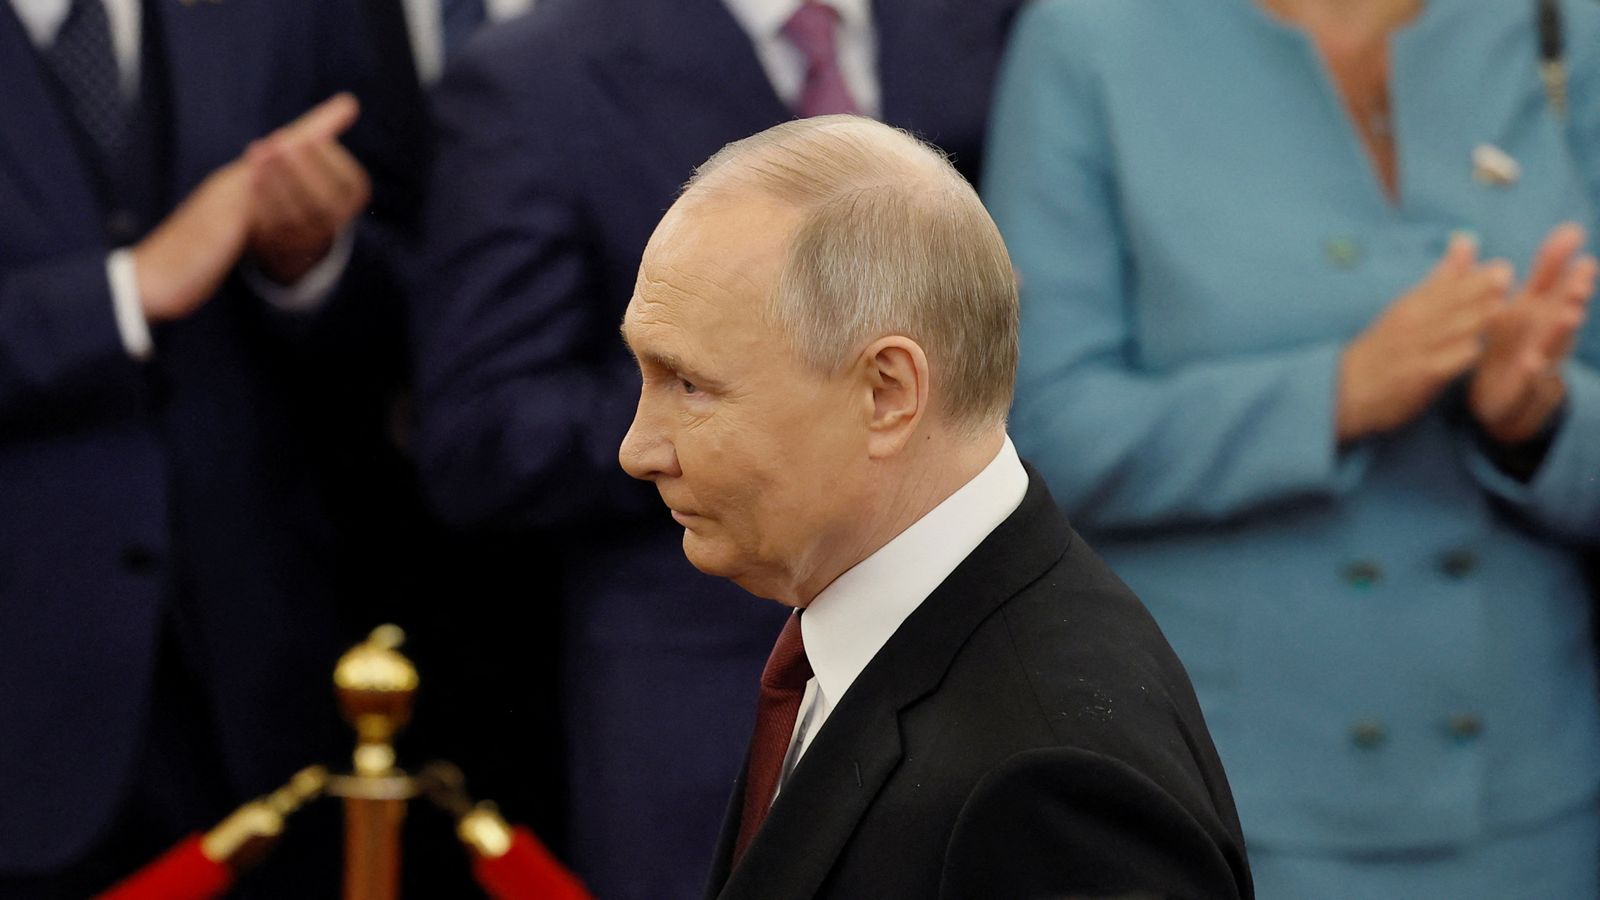 putin thanks soldiers 'fighting for motherland' as he is inaugurated for fifth time